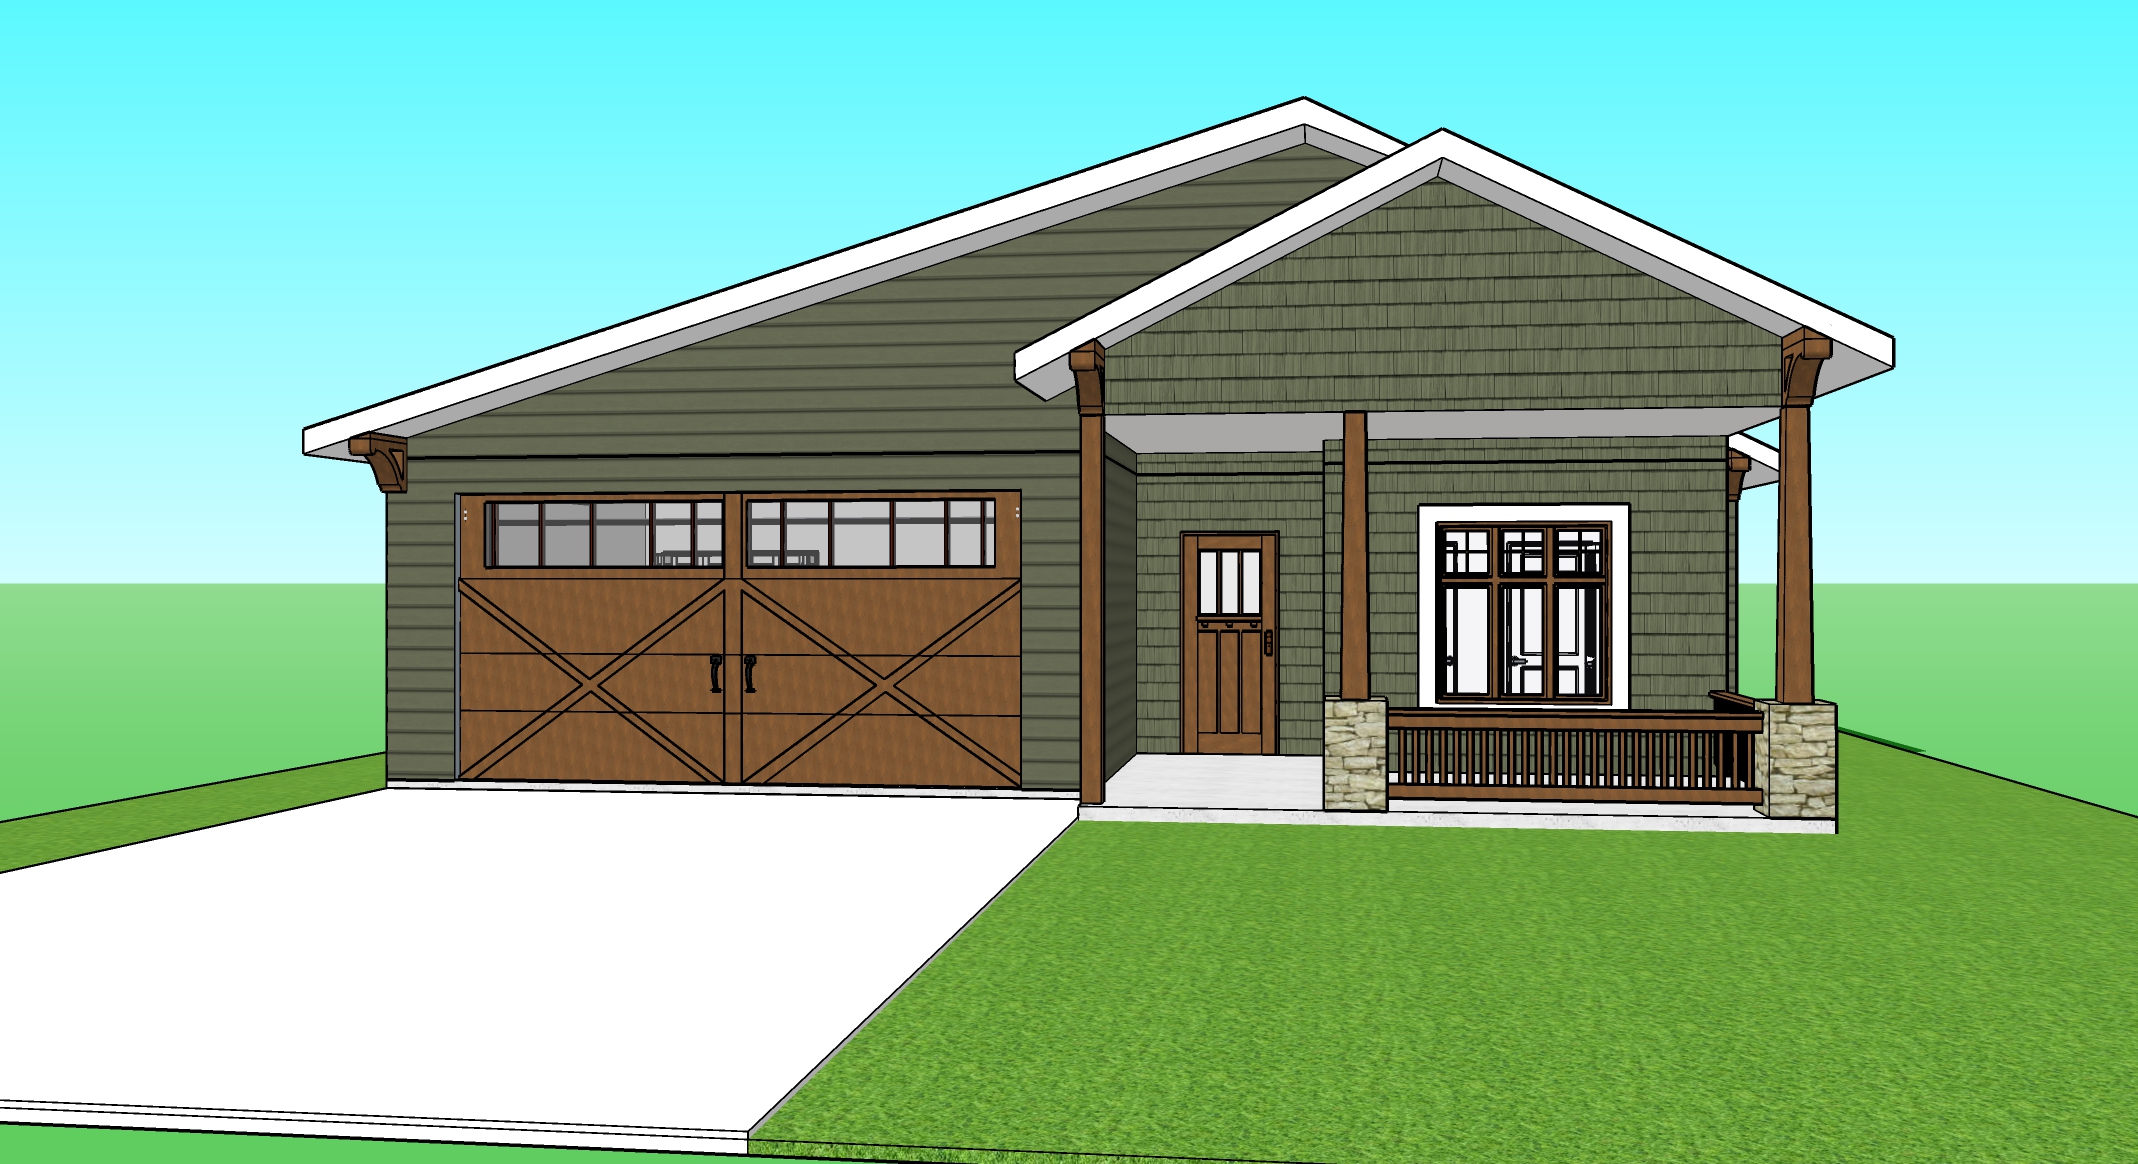 Image exported directly from SketchUp